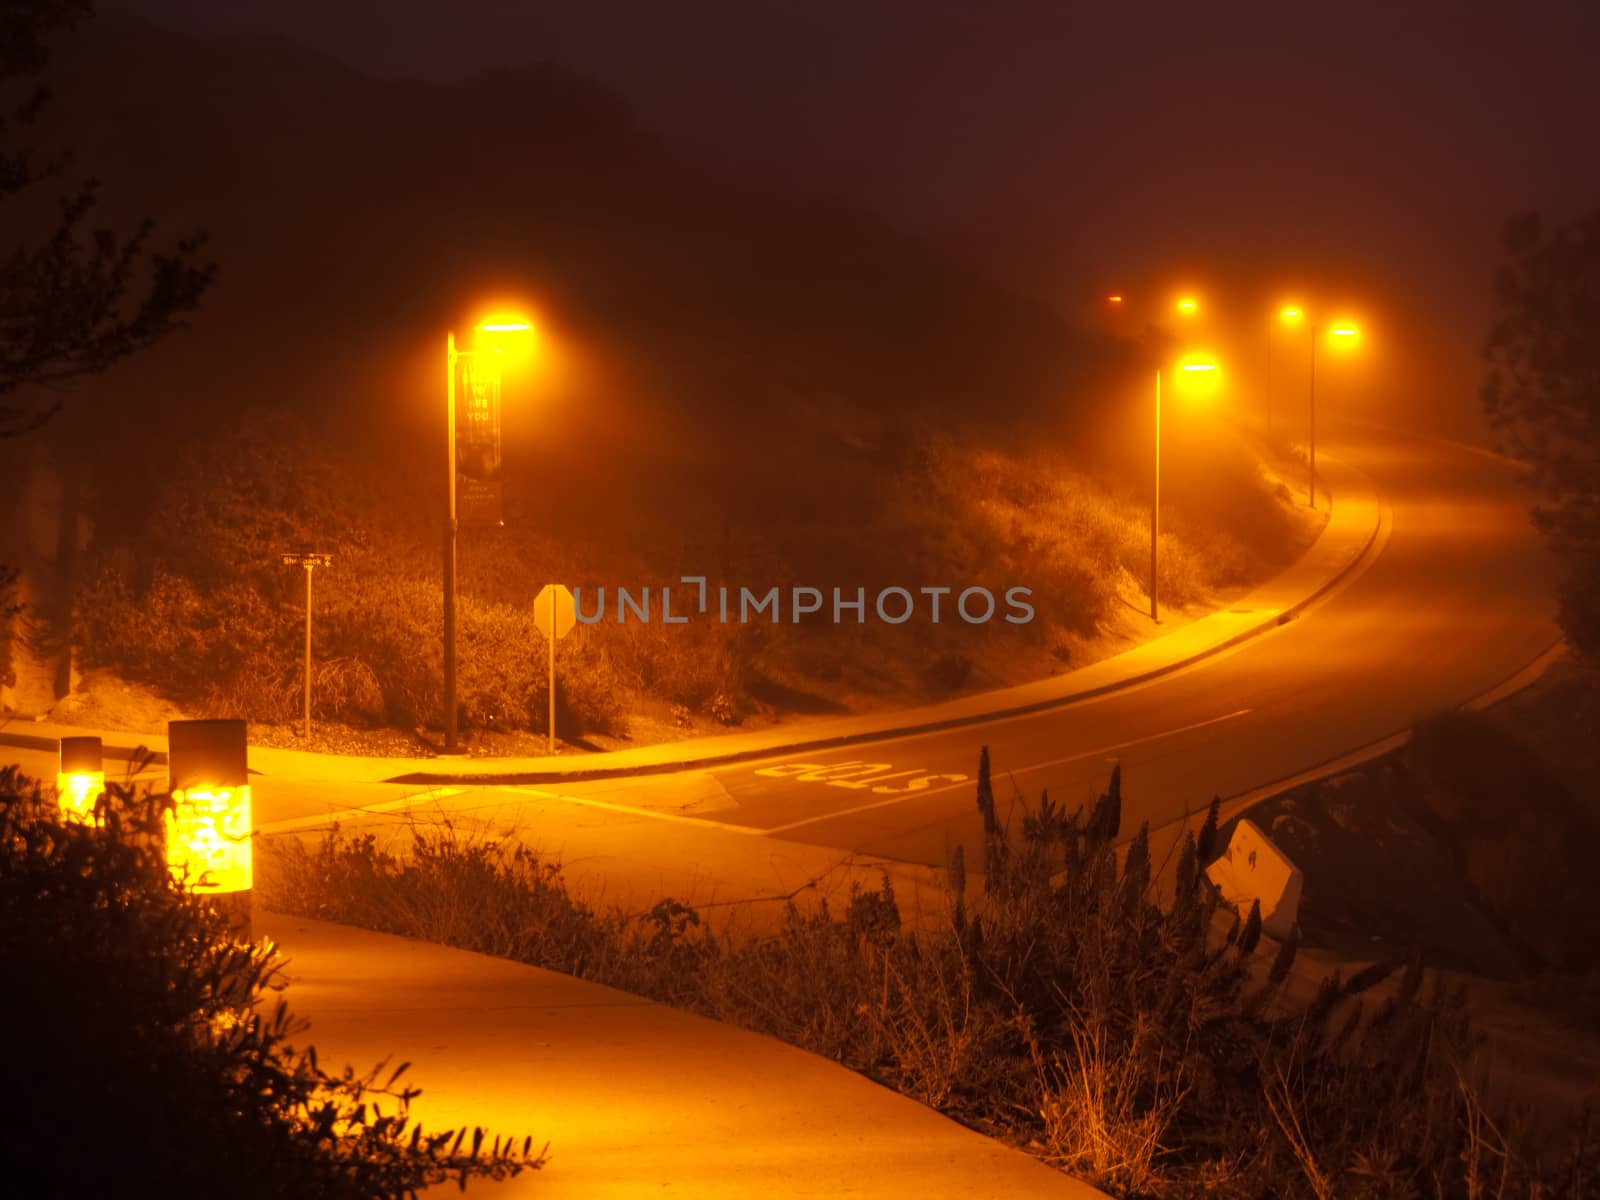 An empty night freeway, illuminated by lamps in a mist. Sun Diego, USA